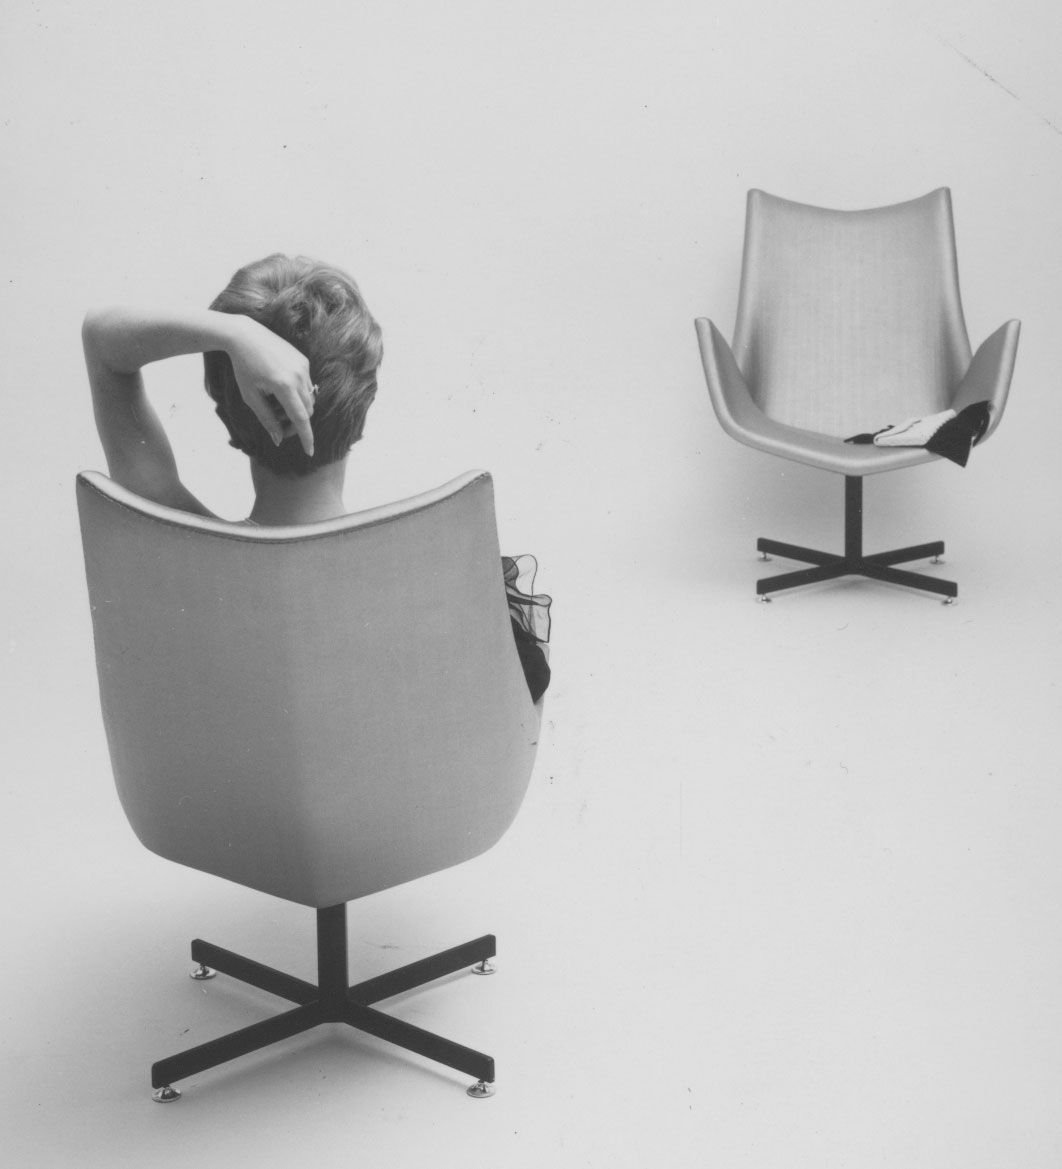 Floating chairs, 1960